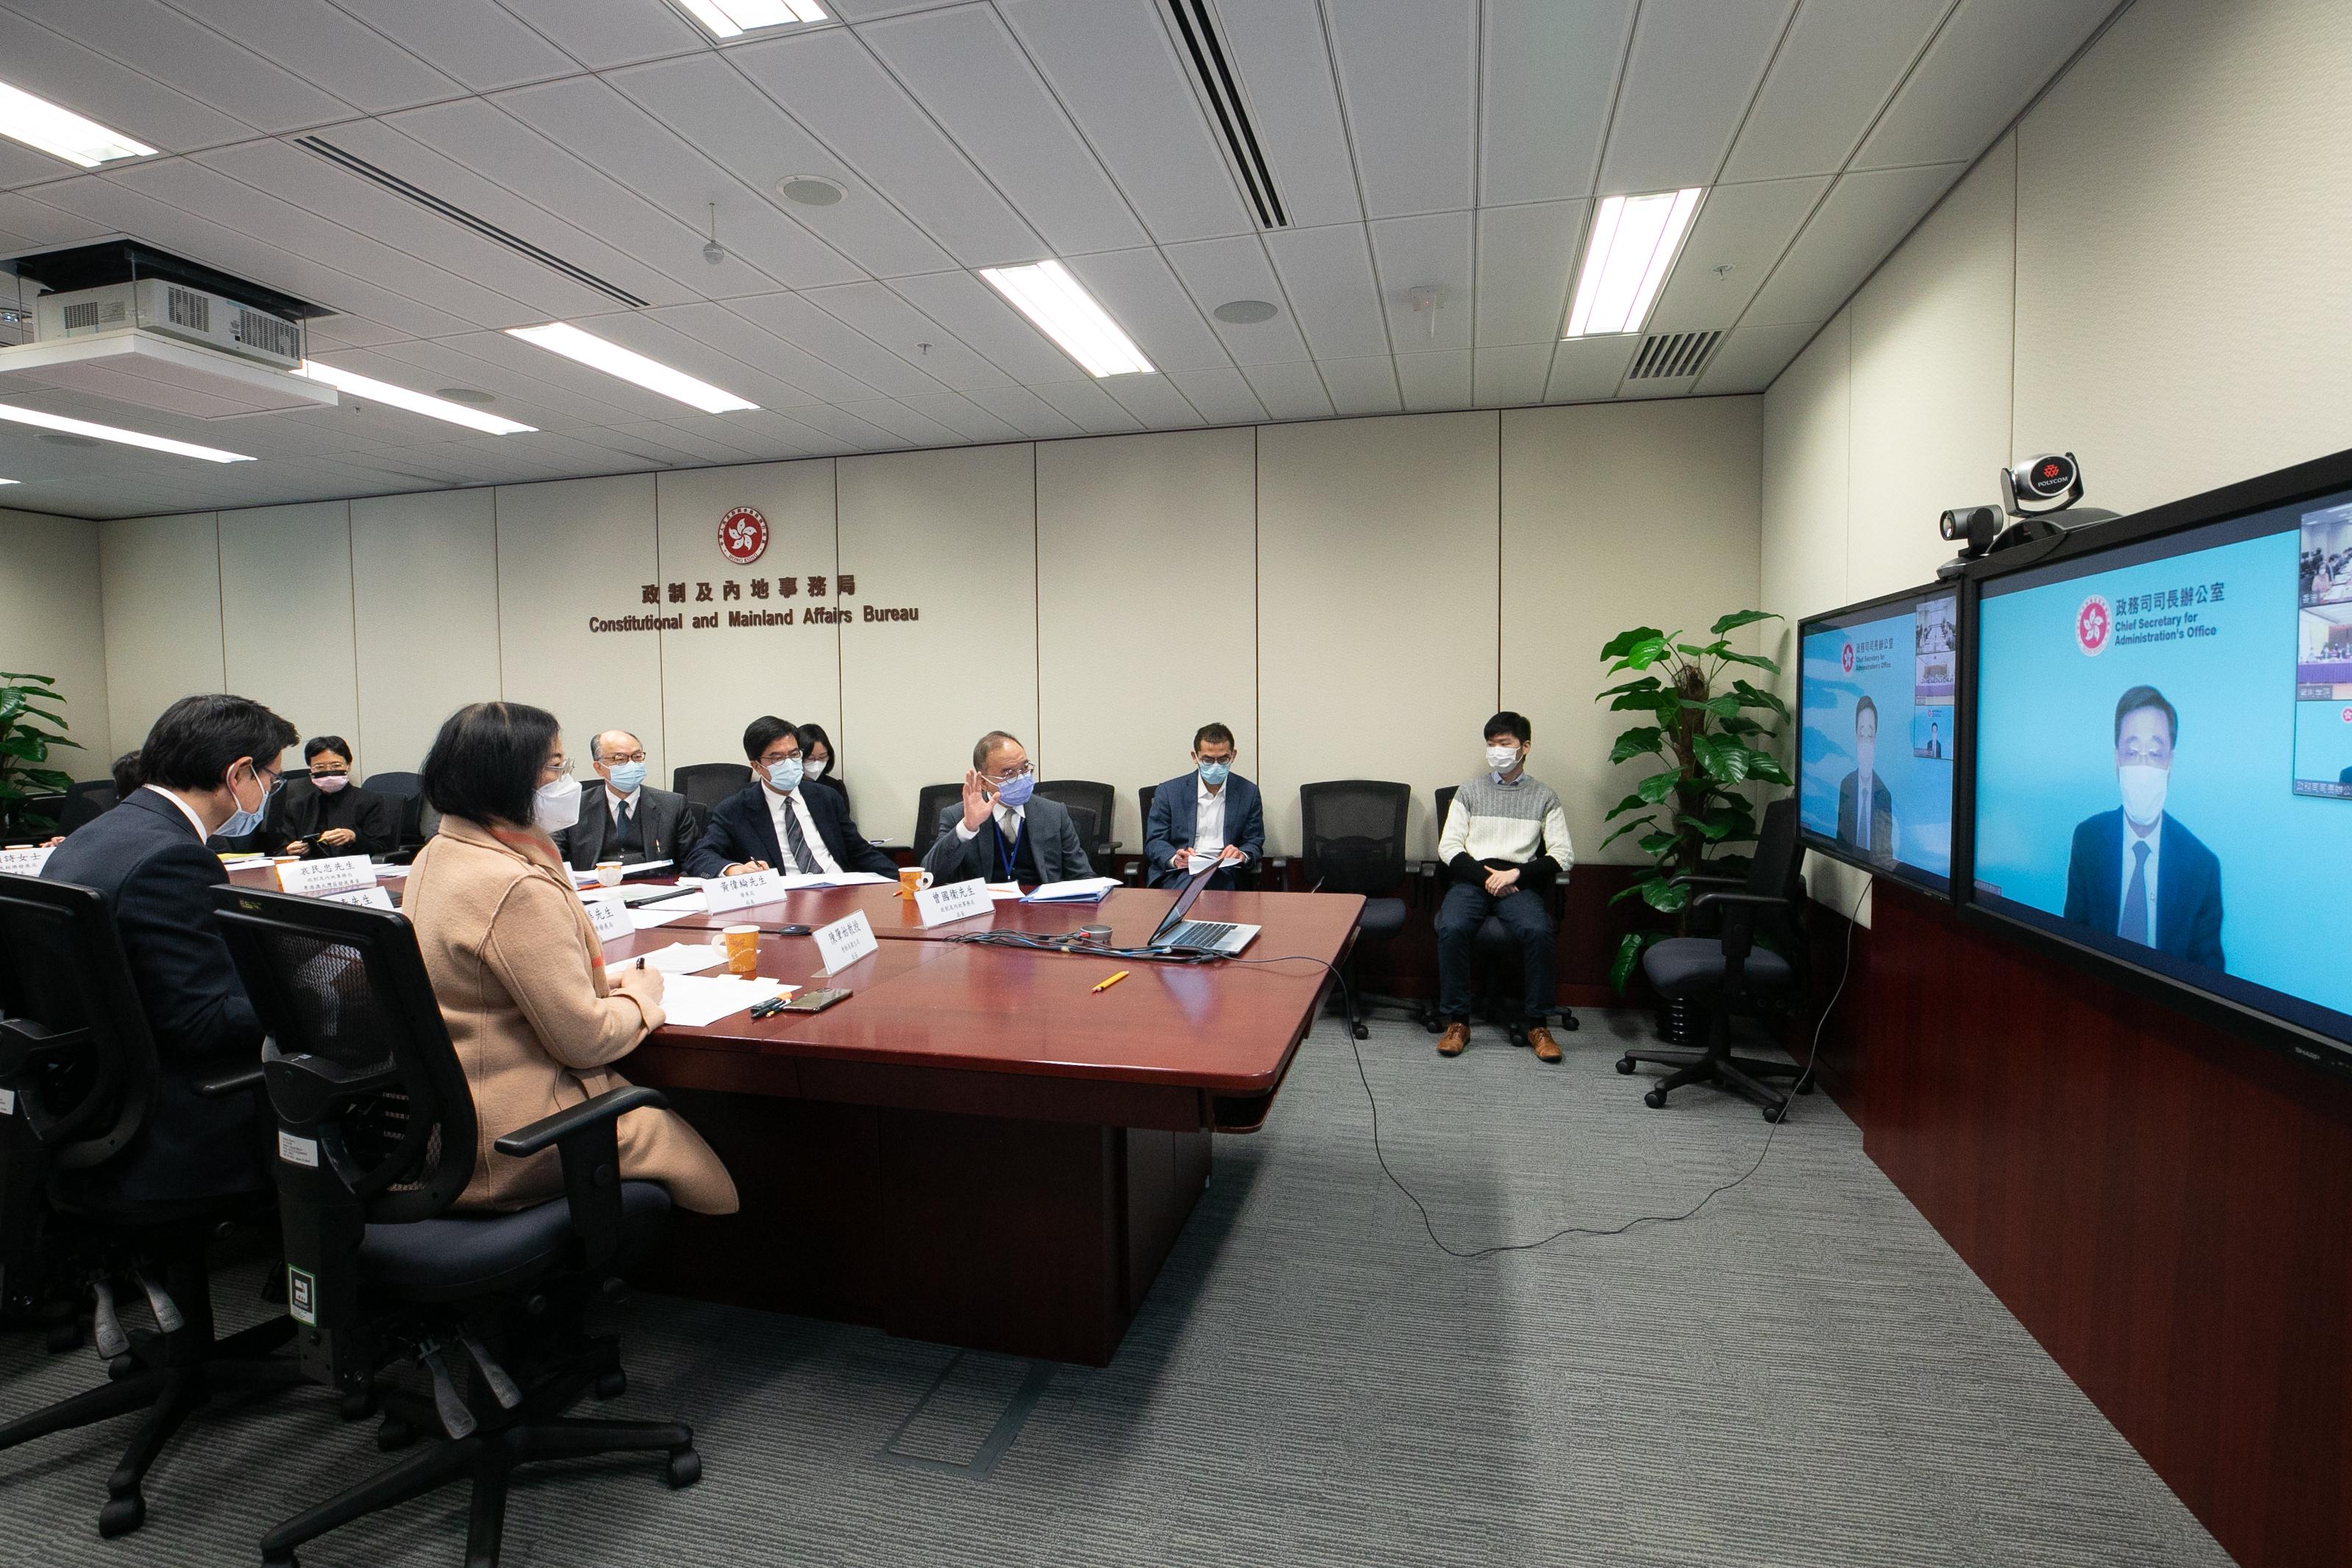 The Chief Secretary for Administration, Mr John Lee, and the leaders of the five task forces of the Hong Kong Special Administrative Region (HKSAR) Government held a video conference on February 18 for the anti-epidemic task force with the Hong Kong and Macao Affairs Office of the State Council, the National Health Commission as well as relevant Mainland officials and experts. Photo shows Mr Lee (on the screen) and the five HKSAR leaders: the Secretary for Food and Health, Professor Sophia Chan (front row, second left); the Secretary for Constitutional and Mainland Affairs, Mr Erick Tsang Kwok-wai (back row, third right); the Secretary for Development, Mr Michael Wong (back row, fourth right); the Secretary for Commerce and Economic Development, Mr Edward Yau (front row, first left); and the Secretary for Transport and Housing, Mr Frank Chan Fan (back row, fifth right).

